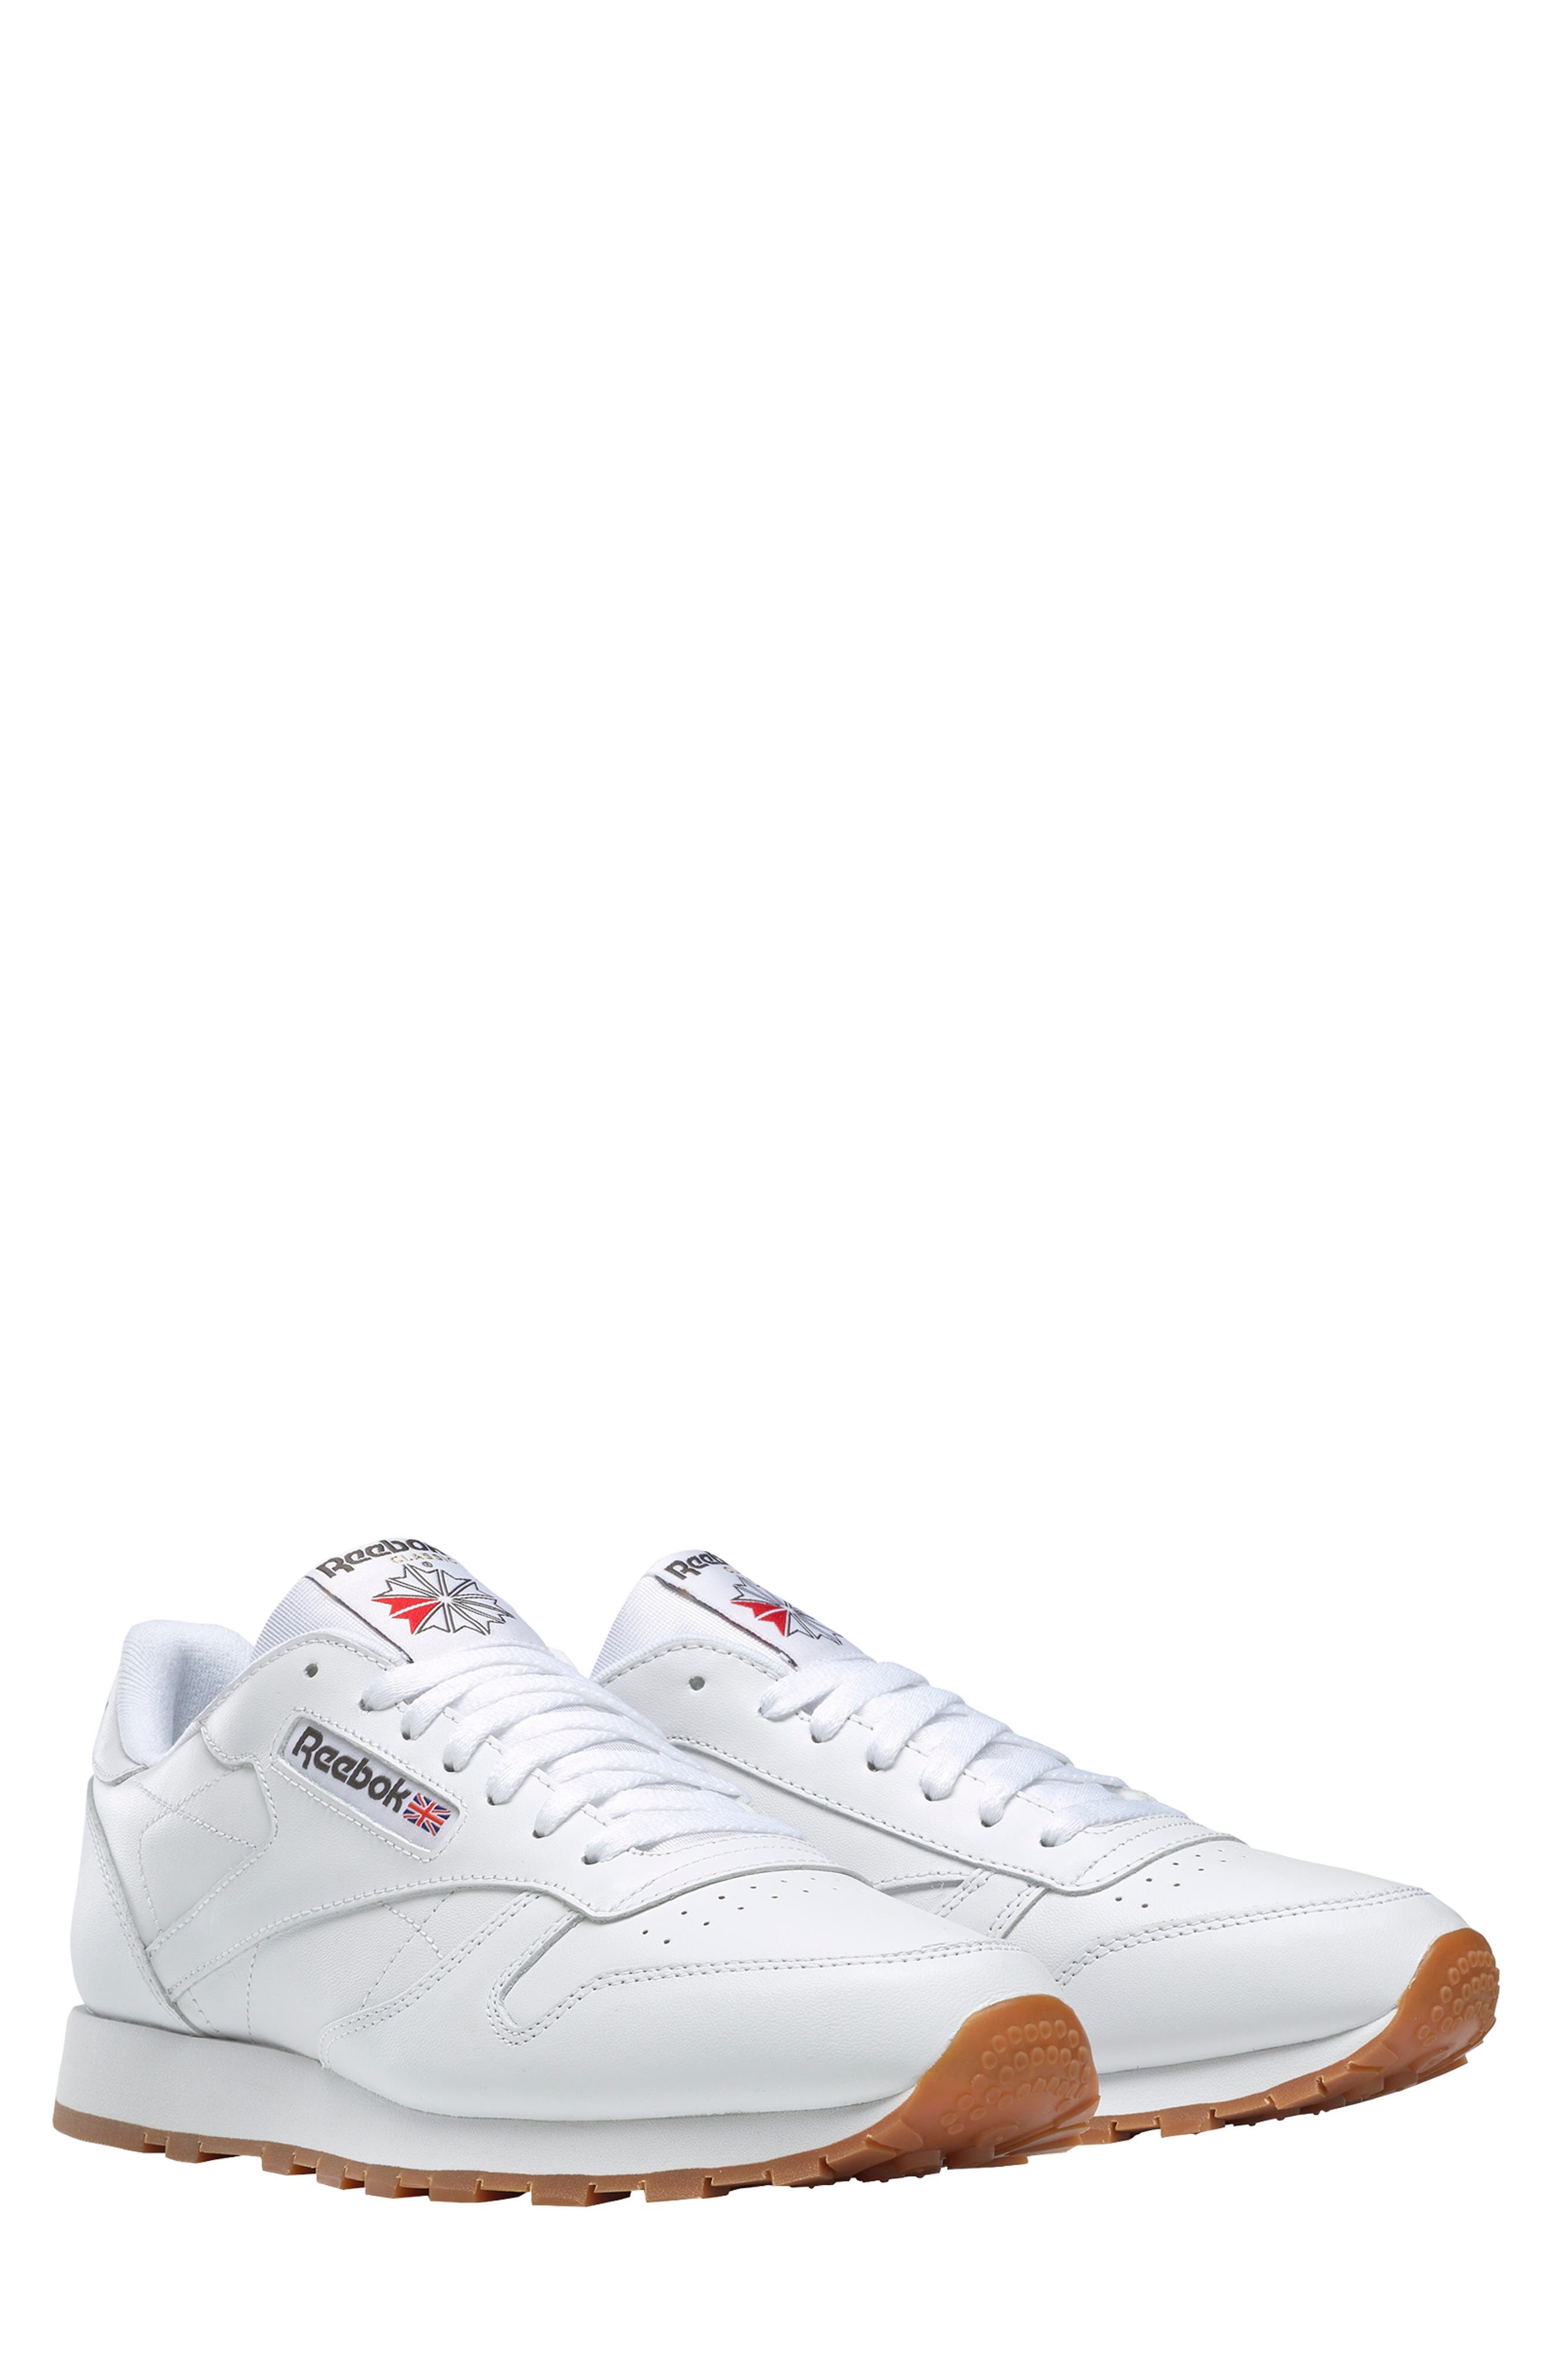 men's reebok classic leather casual shoes